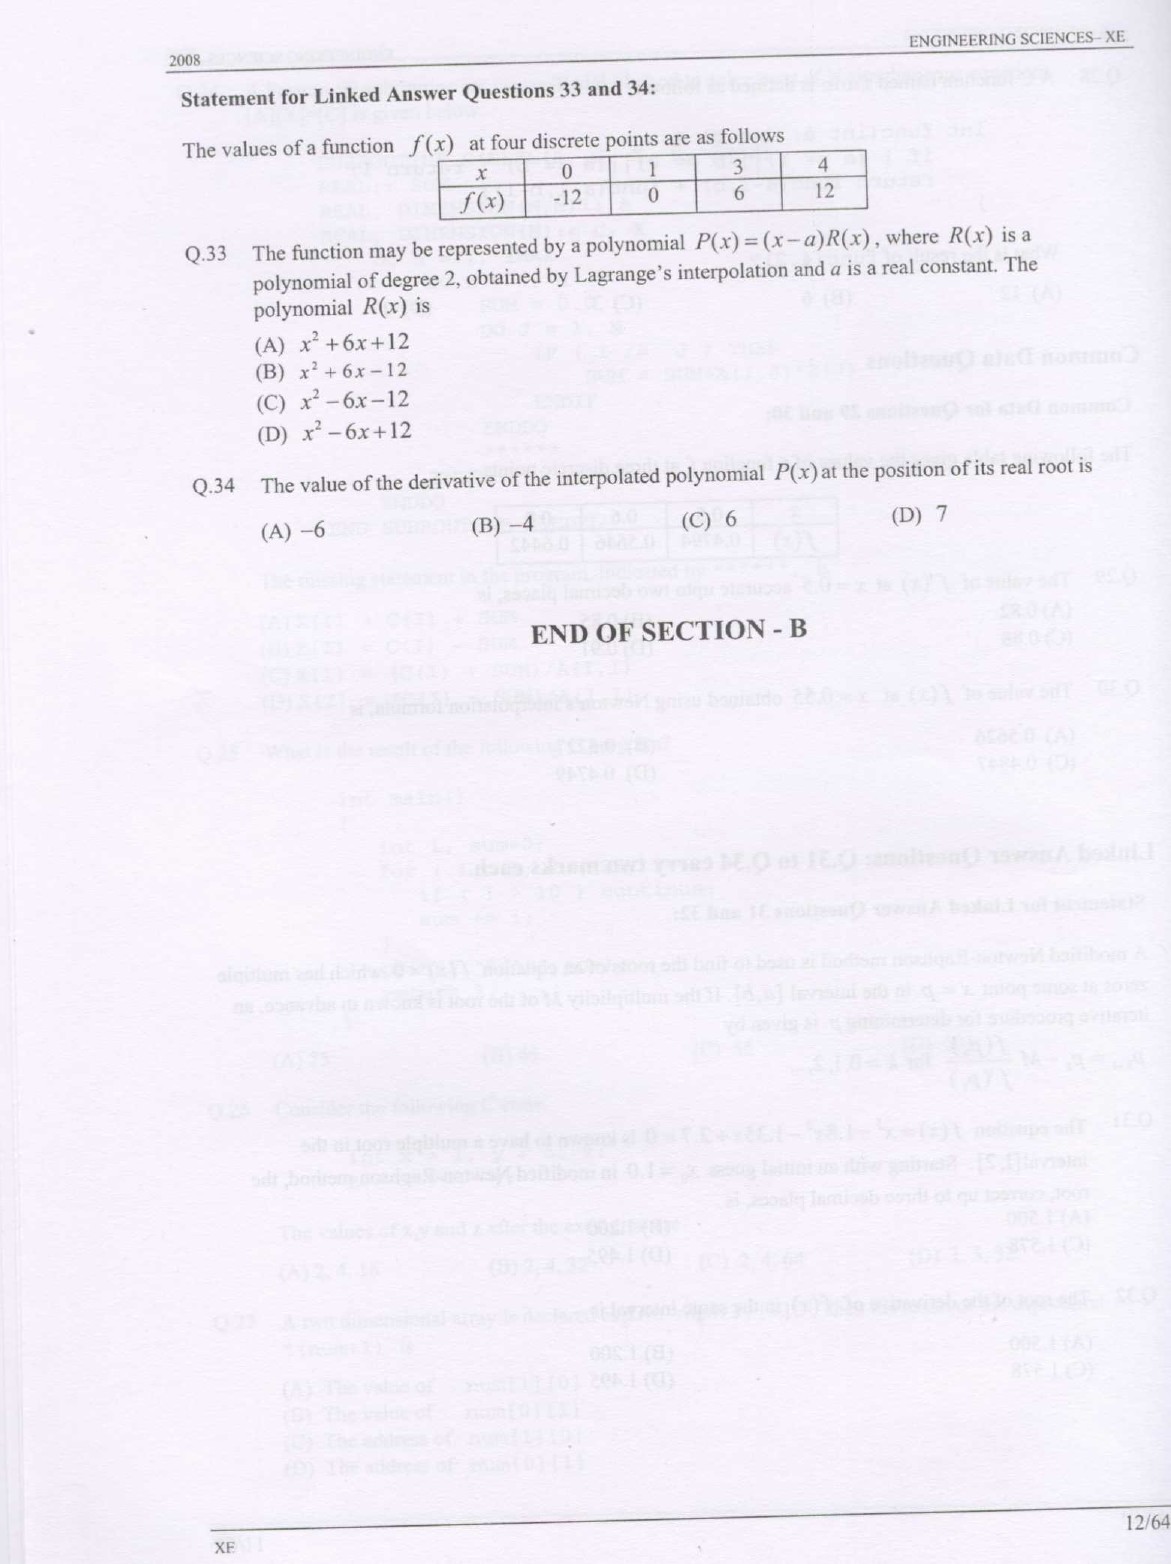 GATE Exam Question Paper 2008 Engineering Sciences 12